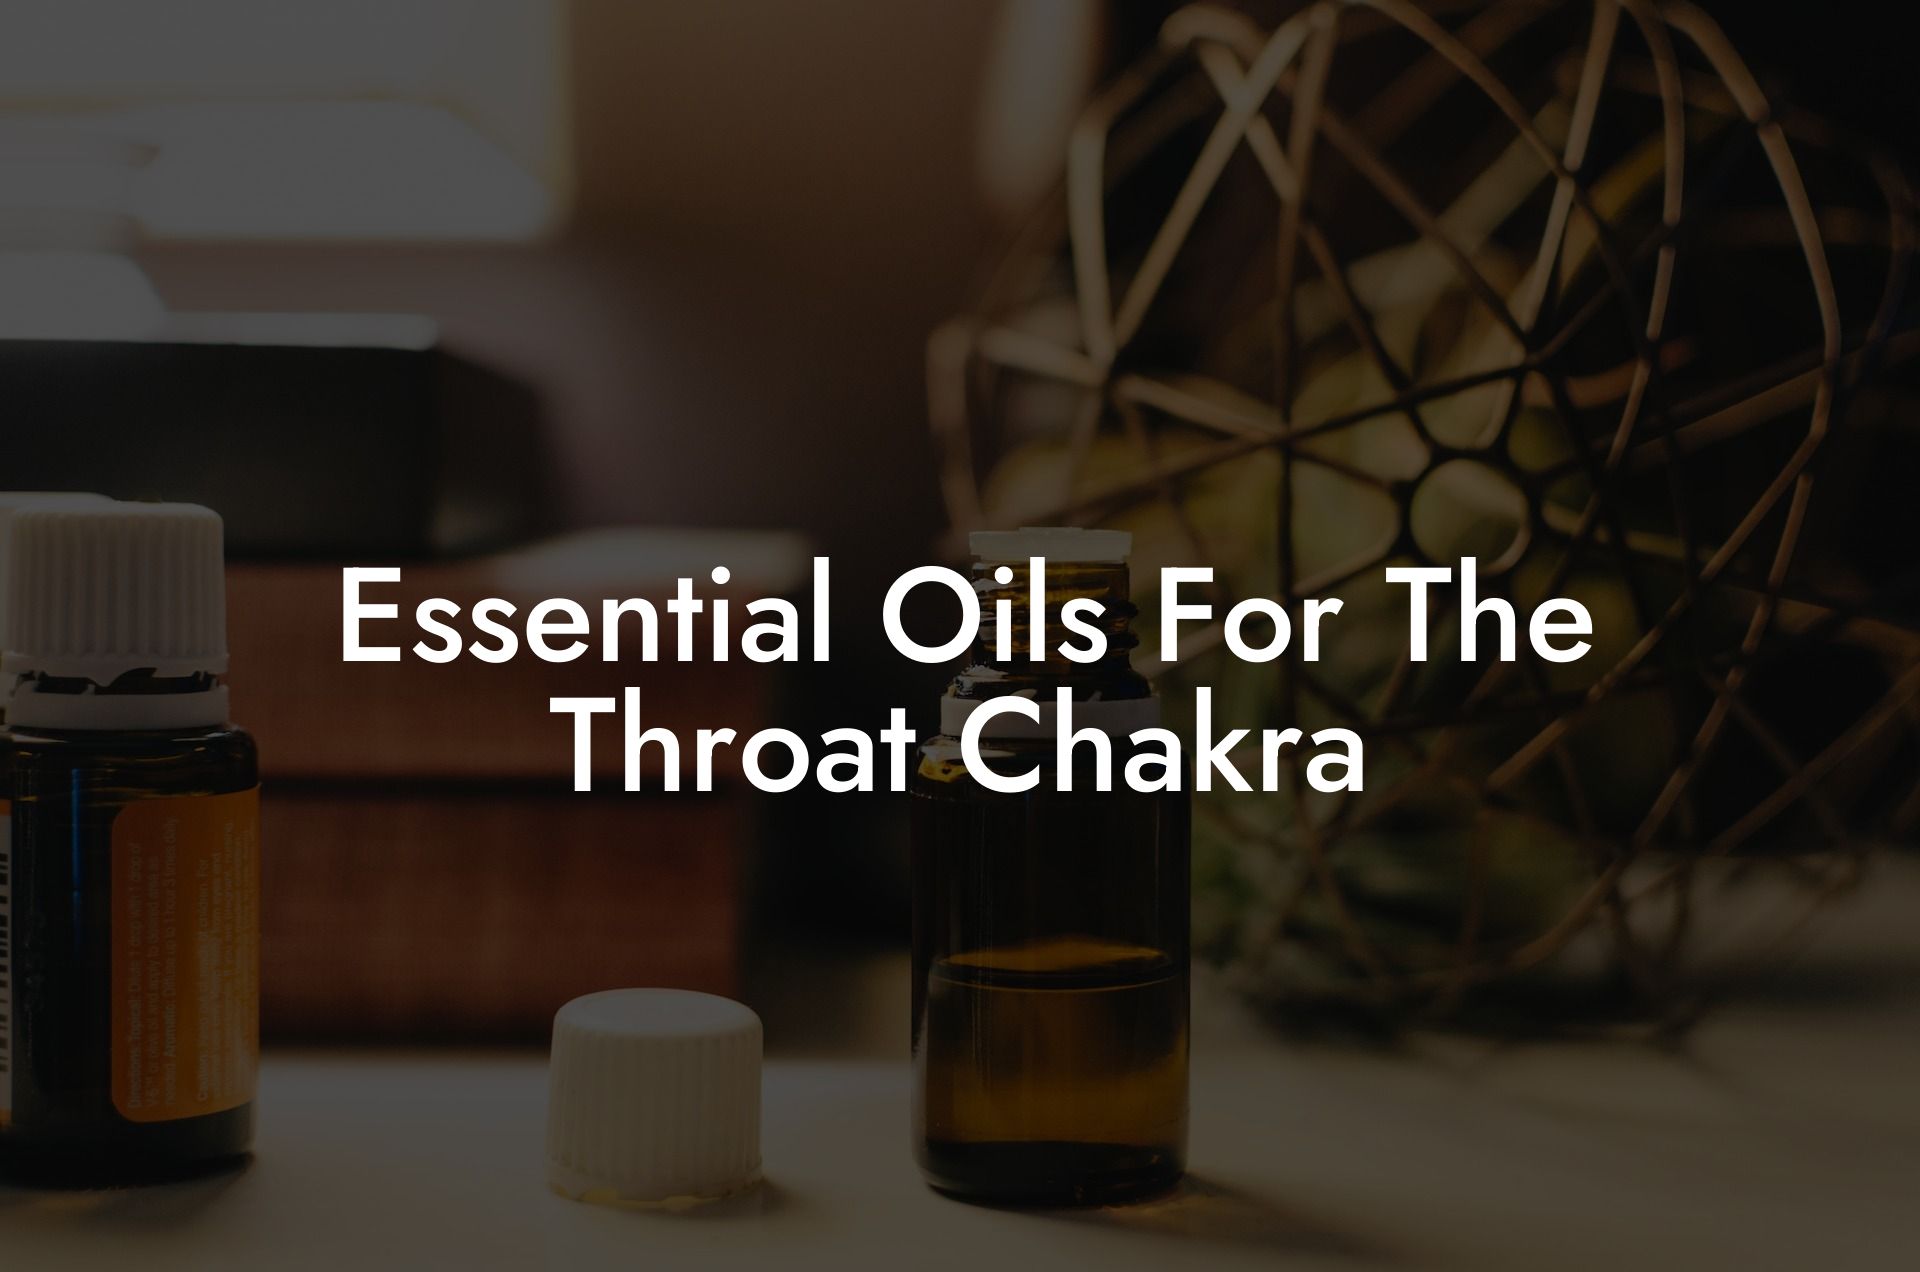 Essential Oils For The Throat Chakra